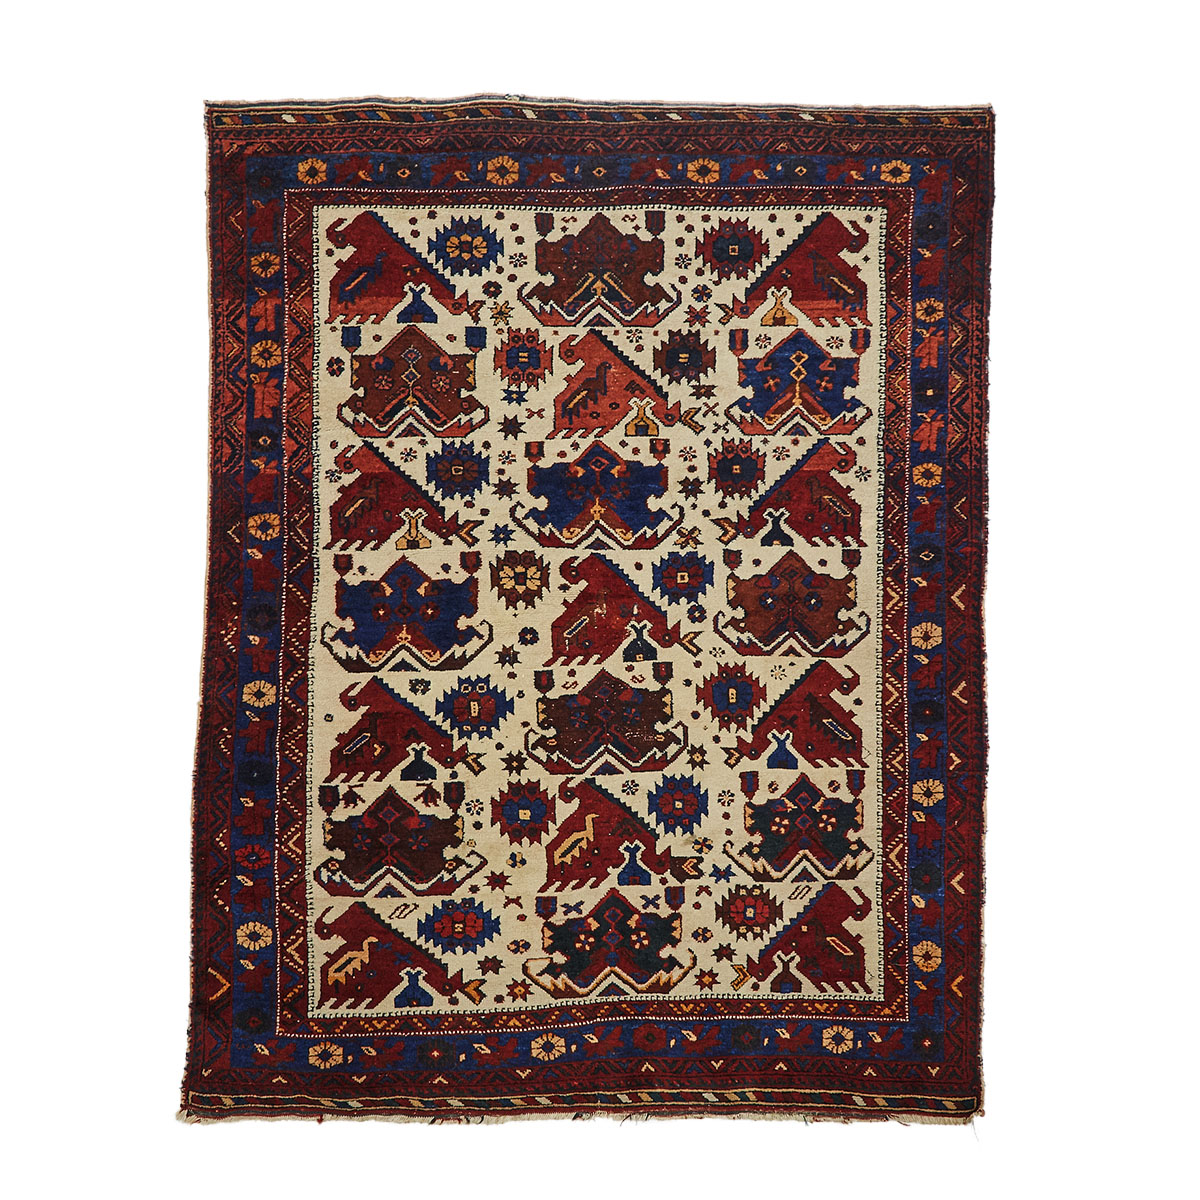 Afshar Rug, Persian, early 20th century